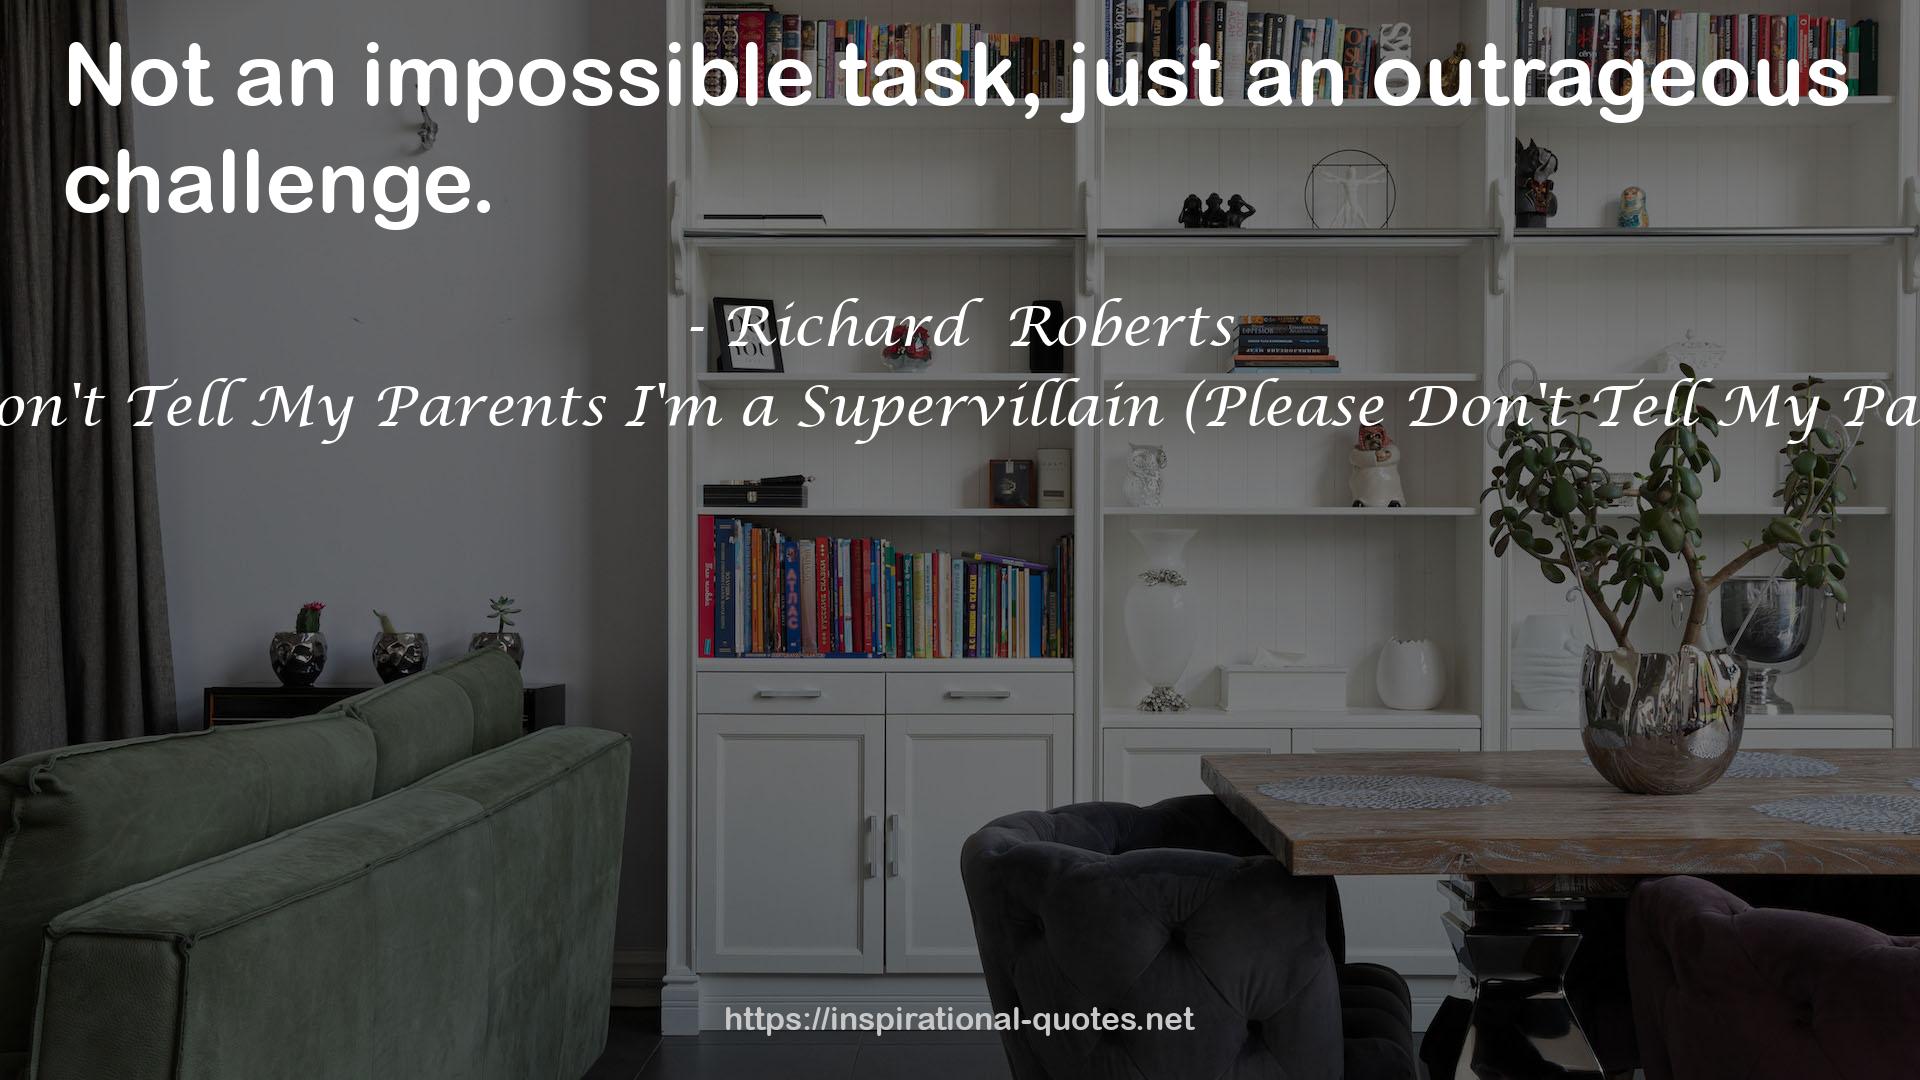 Please Don't Tell My Parents I'm a Supervillain (Please Don't Tell My Parents, #1) QUOTES